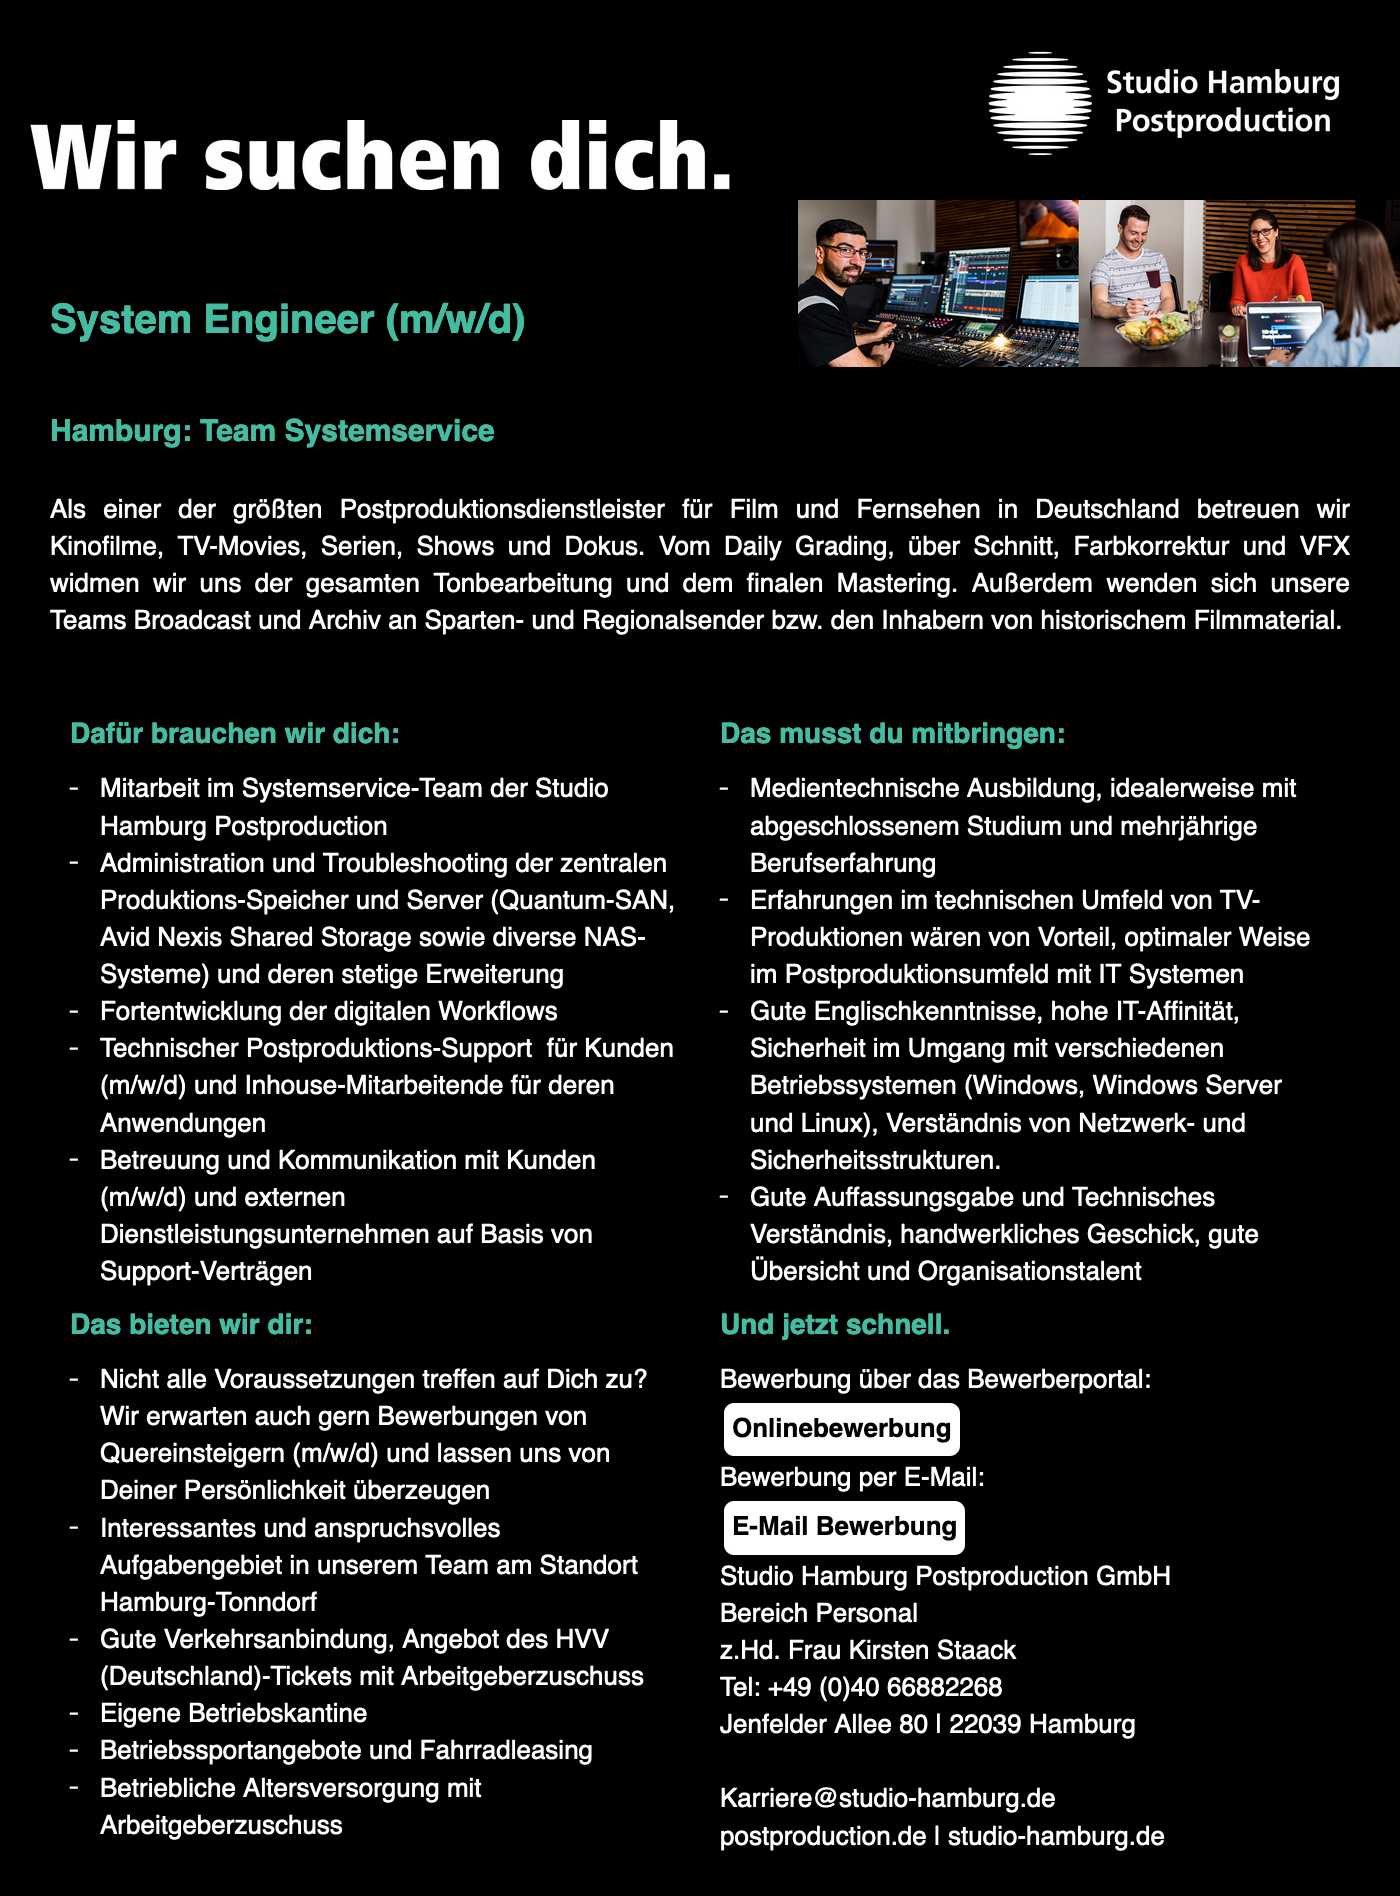 System Engineer (m/w/d)